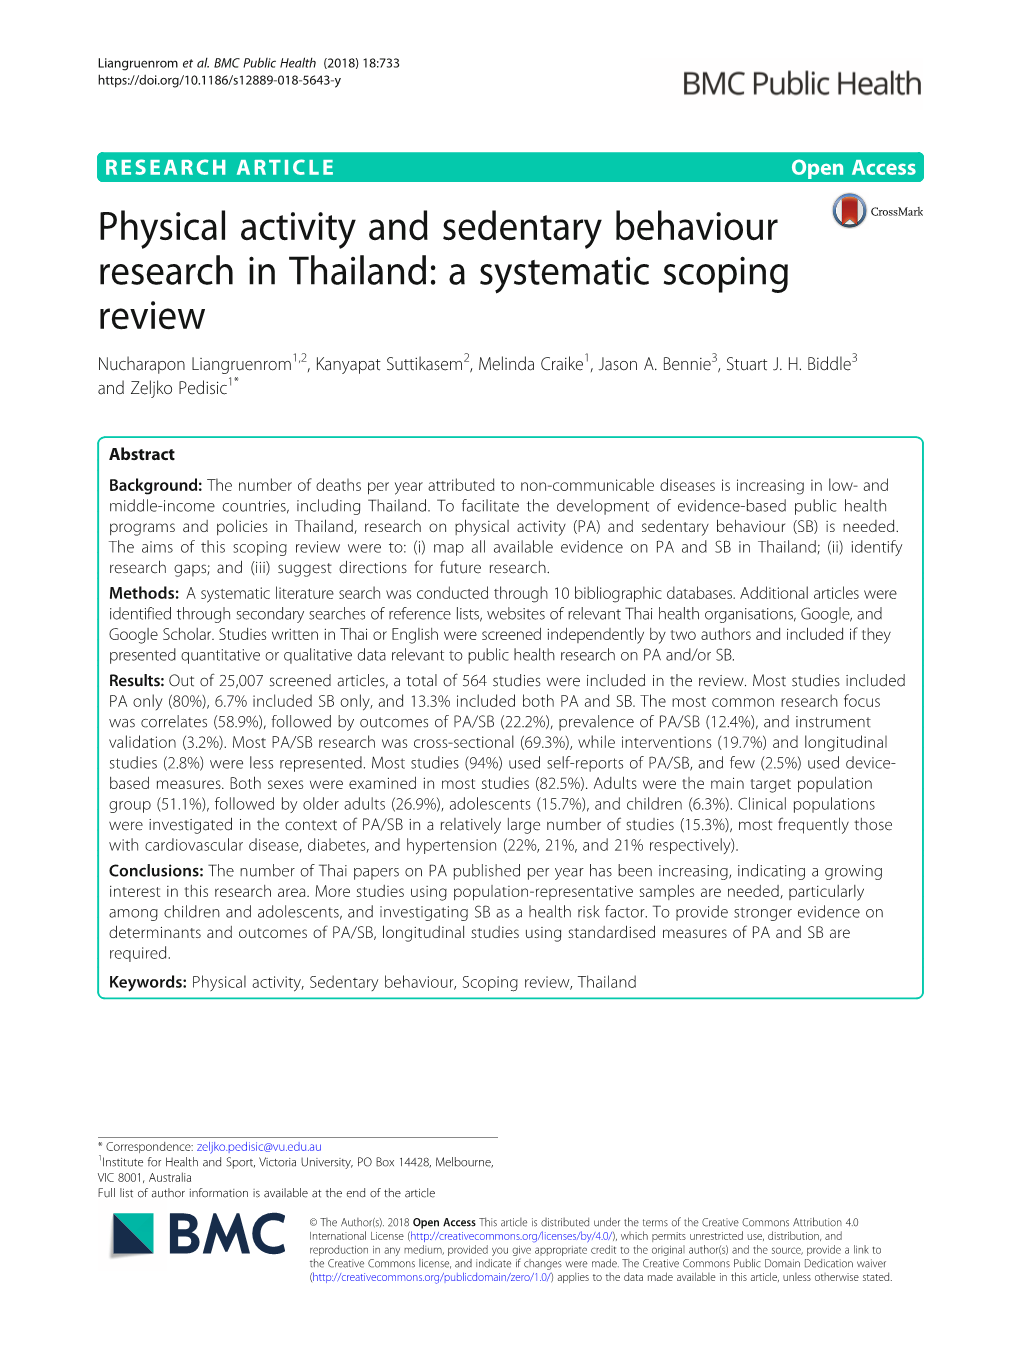 Physical Activity and Sedentary Behaviour Research in Thailand: a Systematic Scoping Review Nucharapon Liangruenrom1,2, Kanyapat Suttikasem2, Melinda Craike1, Jason A